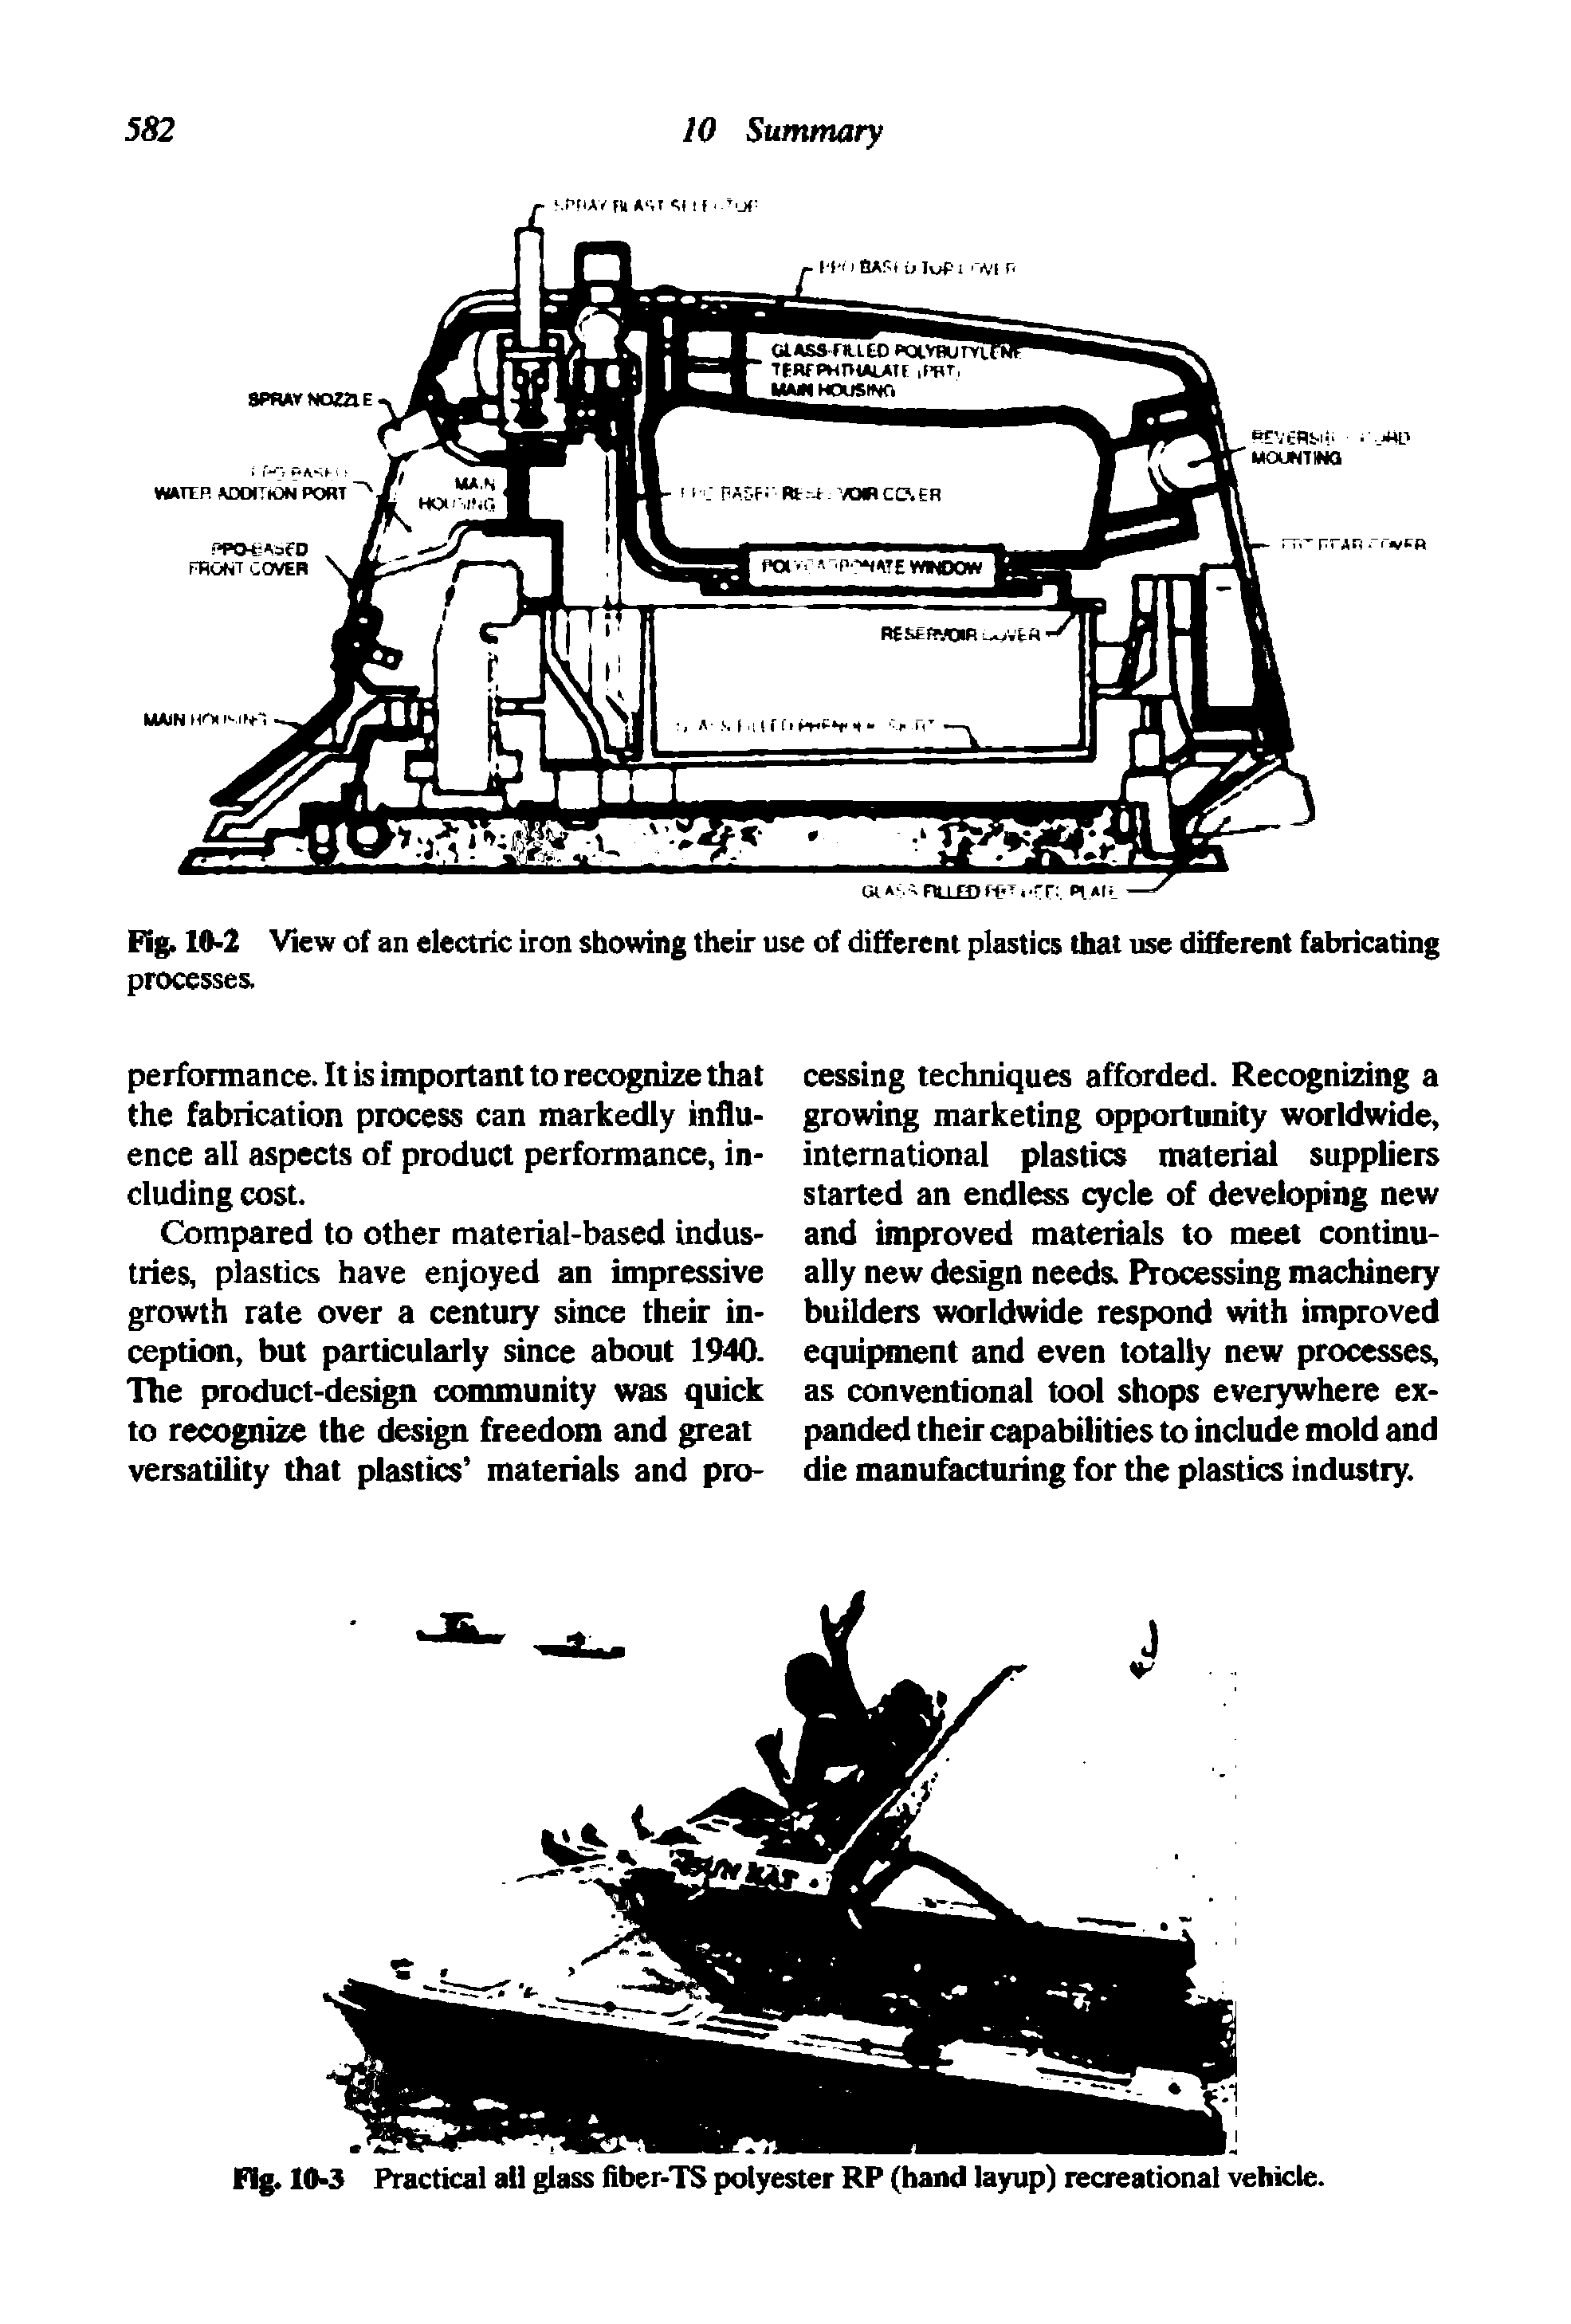 Fig. 10-2 View of an electric iron showing their use of different plastics that use different fabricating...